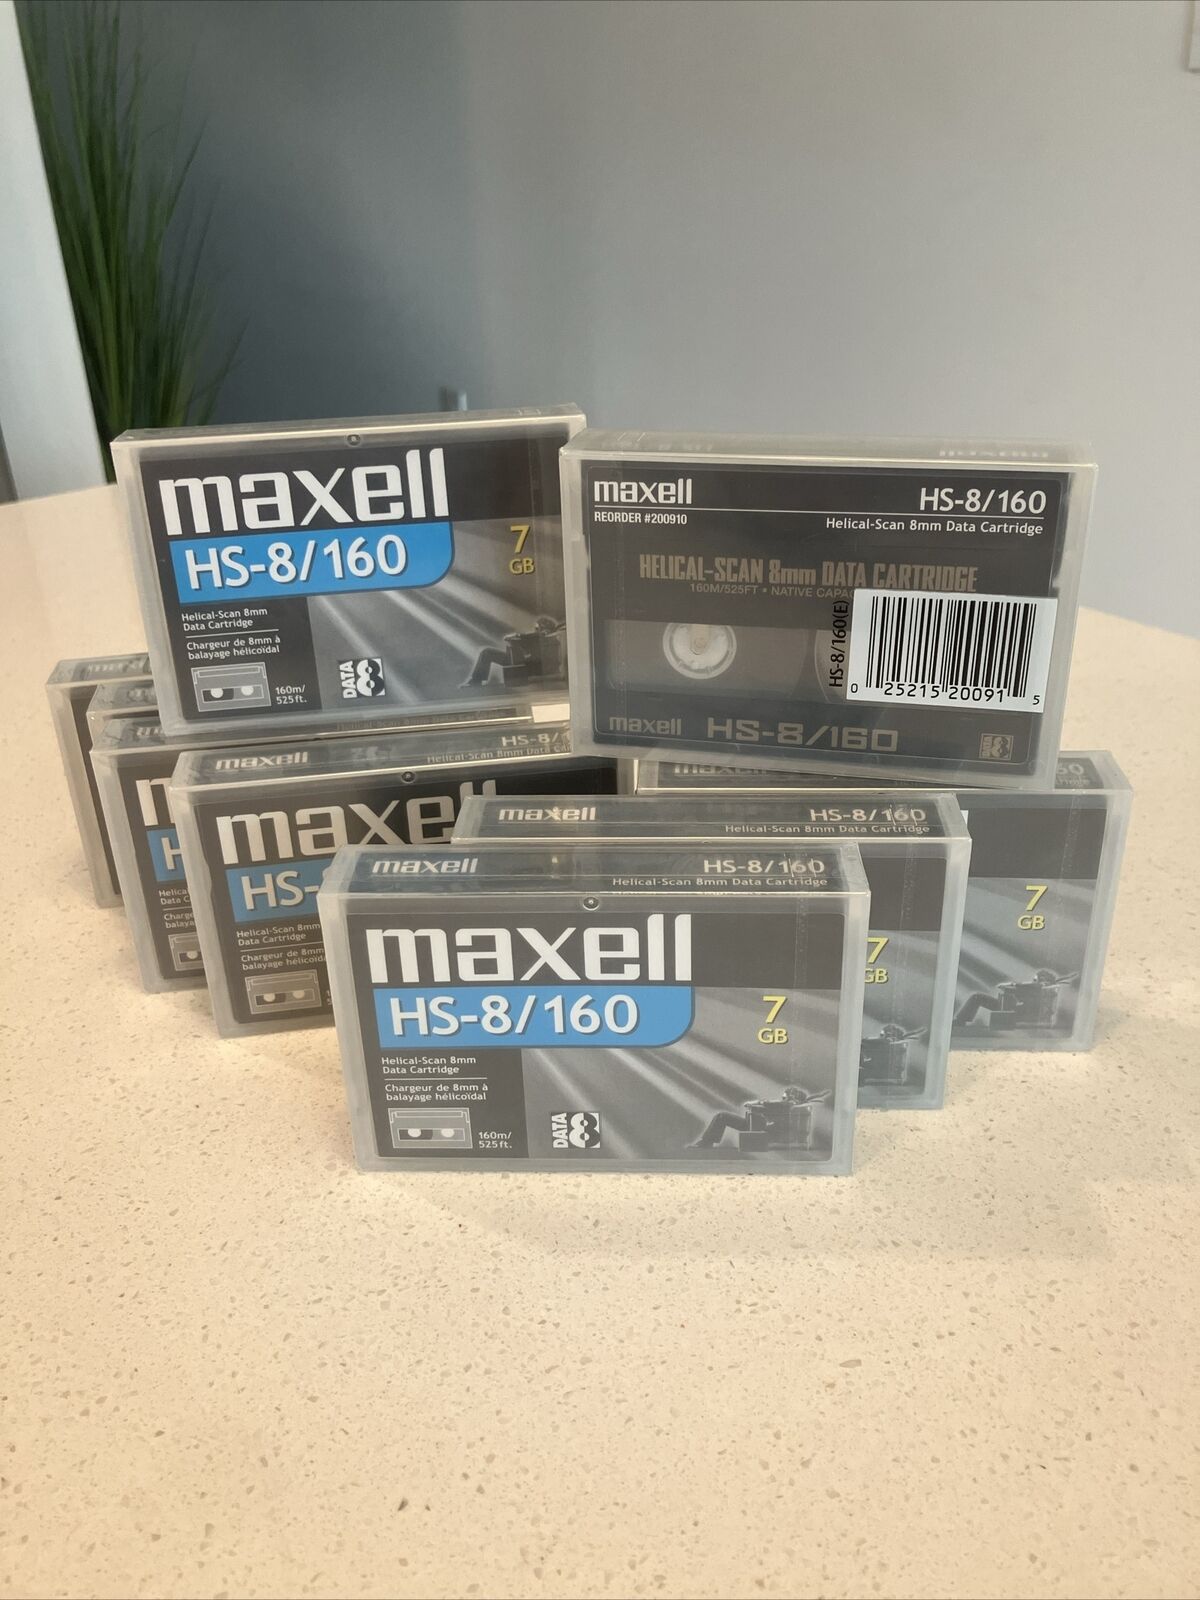 Maxell HS-8/160 7gb helical scan 8 mm data cartridge 9 Pack